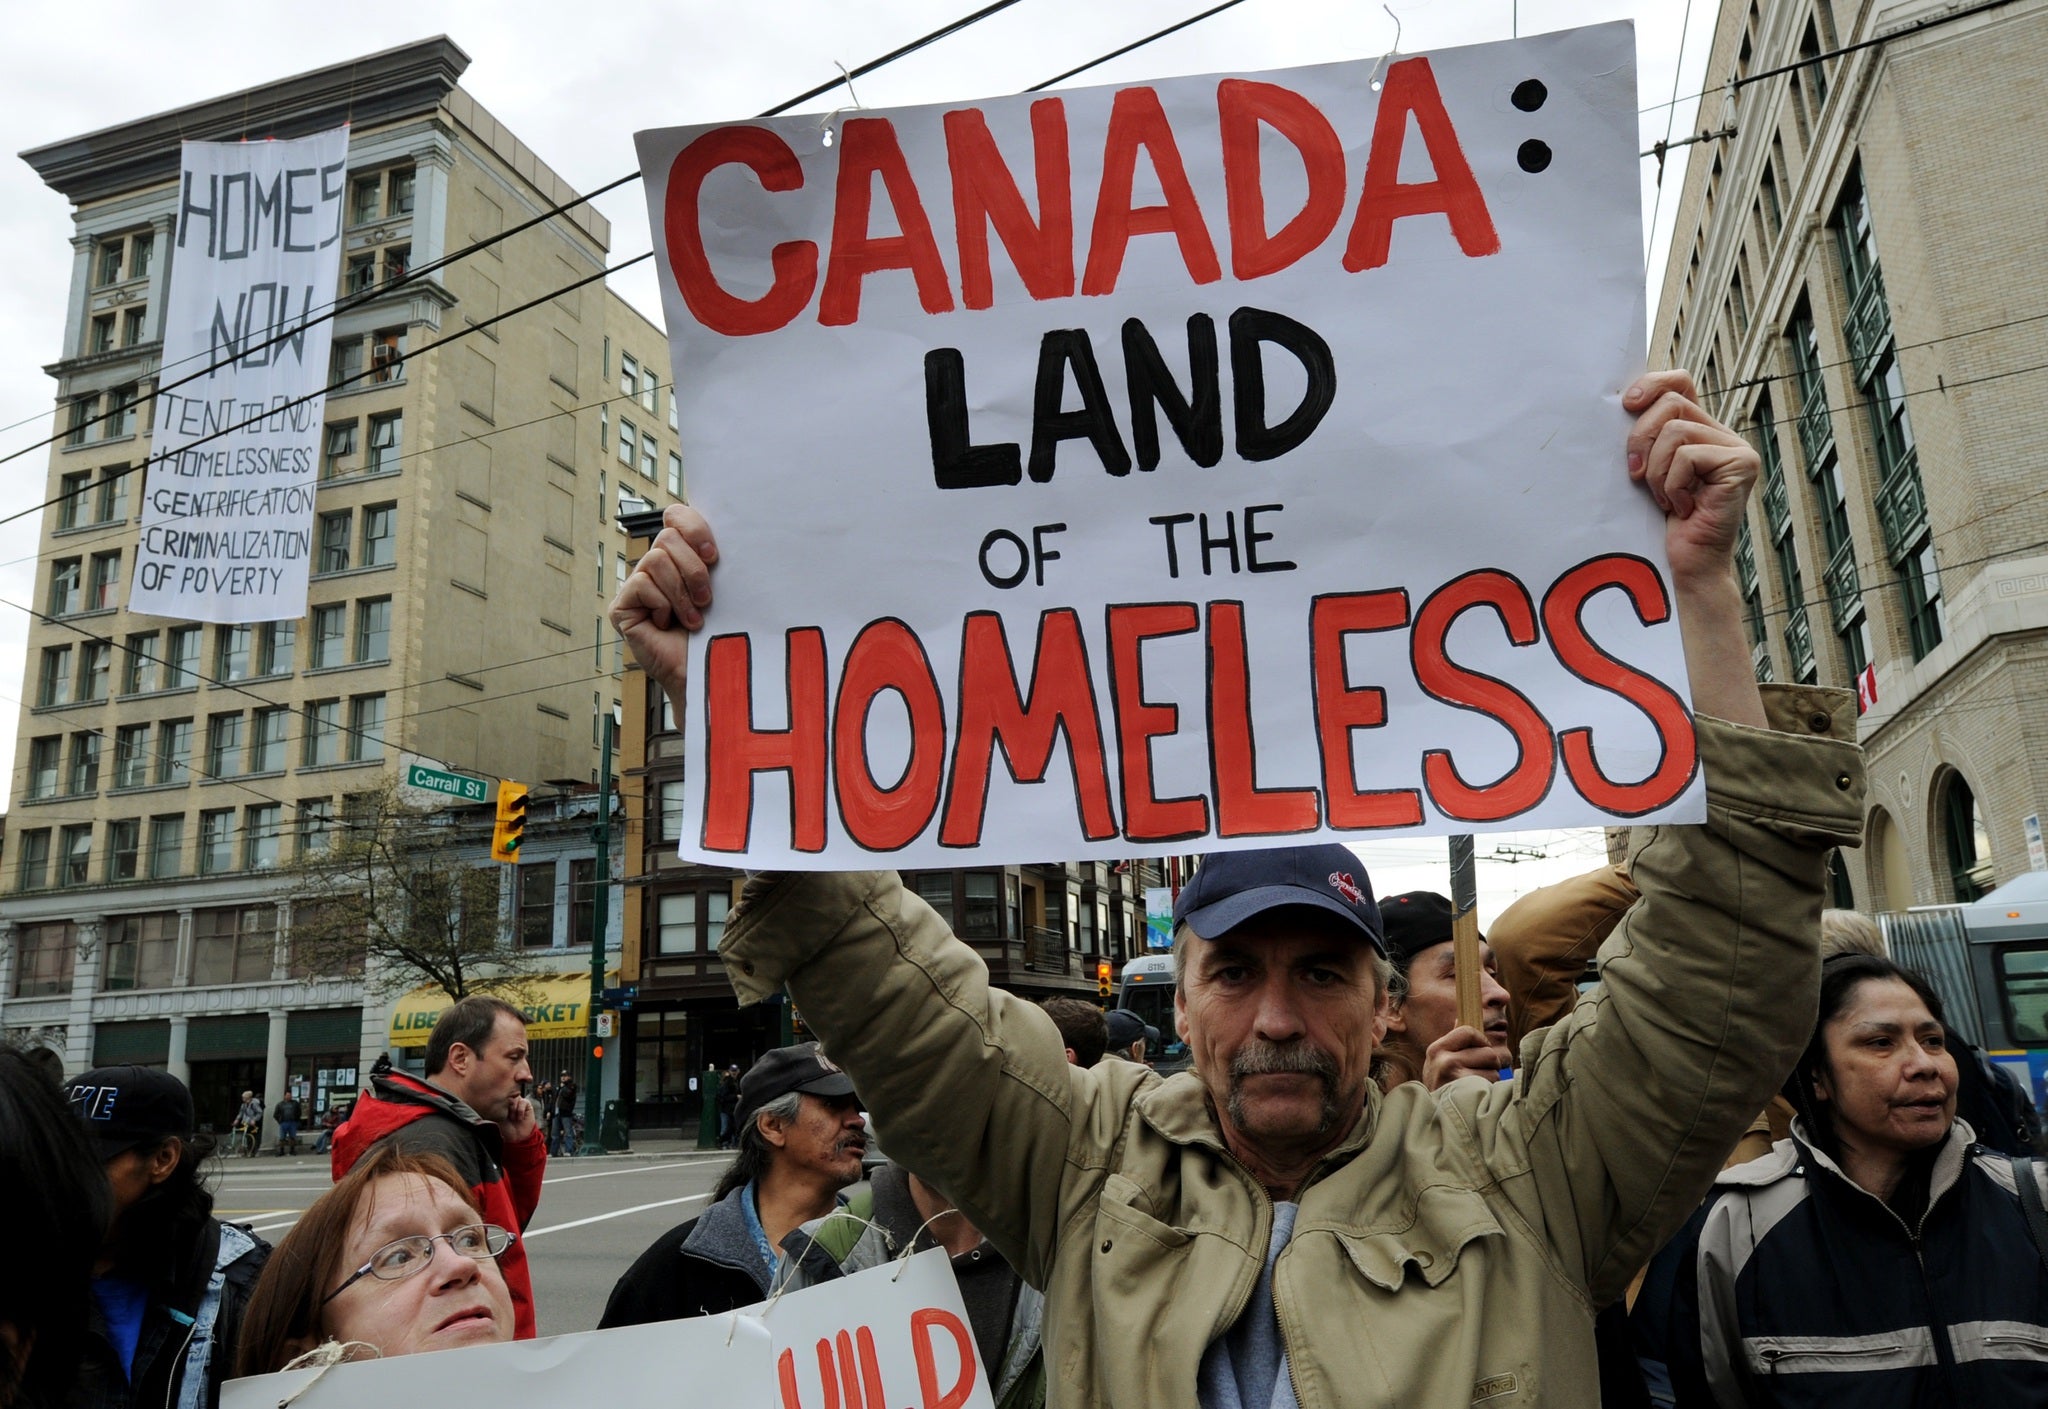 A man protests against homelessness in Vancouver in 2010